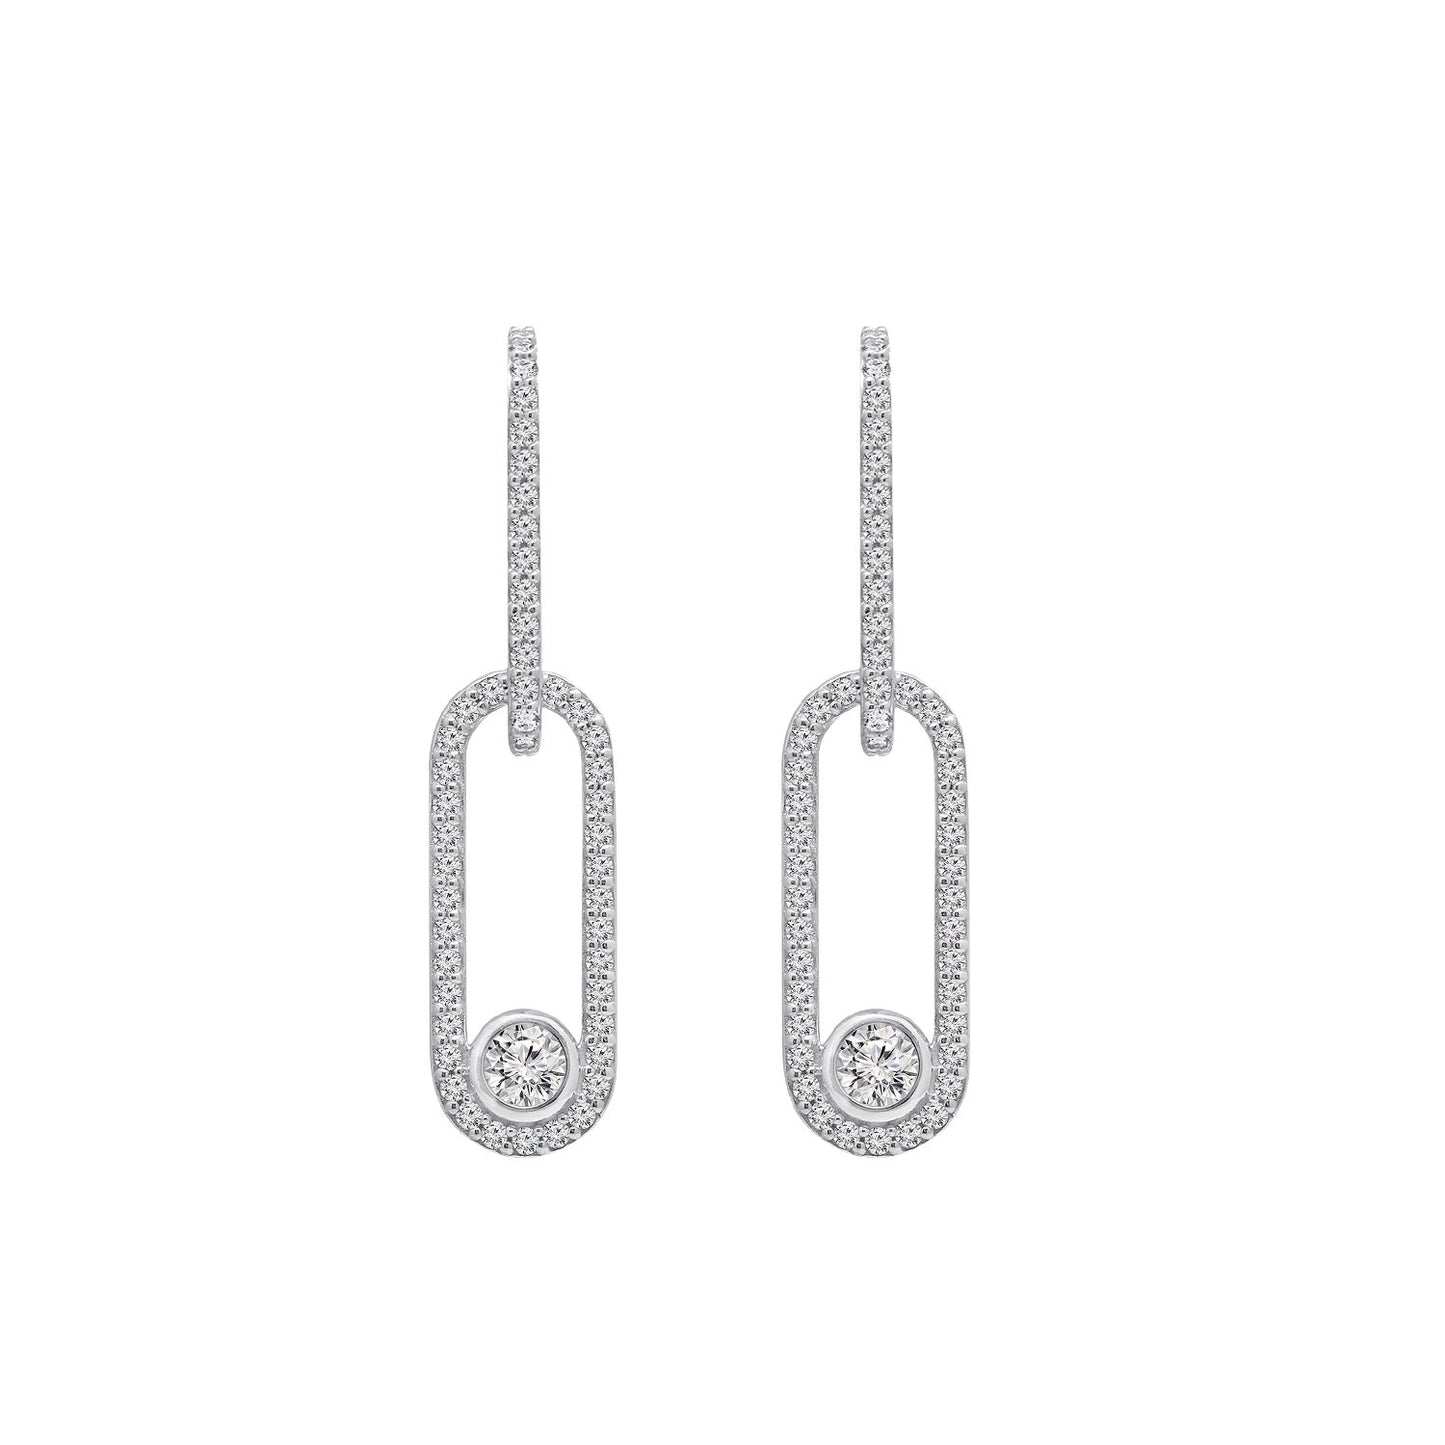 KIERA COUTURE Platinum Clad Sterling Silver 1.4 cttw Cubic Zirconia Pave Double Link Linear Drop Stud Earrings